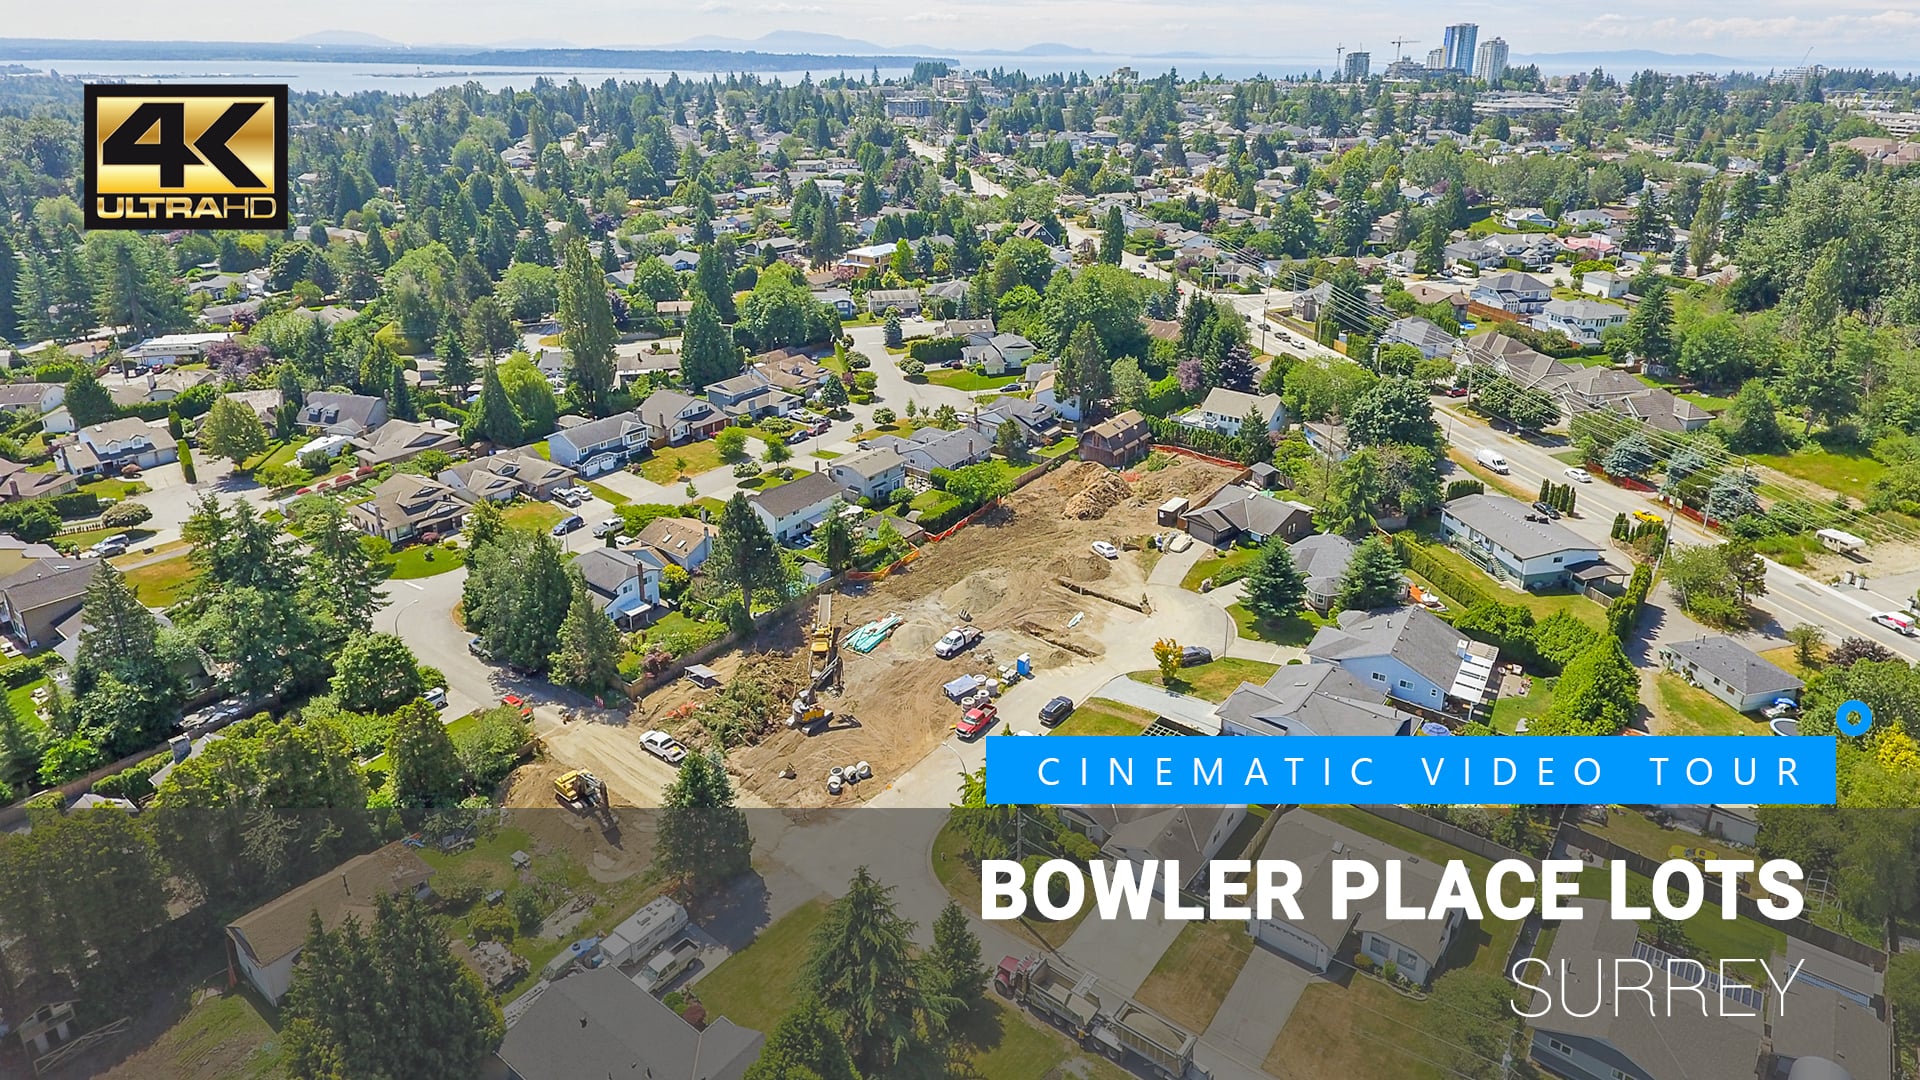 Bowler Place Lots, Surrey for Ron Torres | Real Estate 4K Ultra HD Video Tour